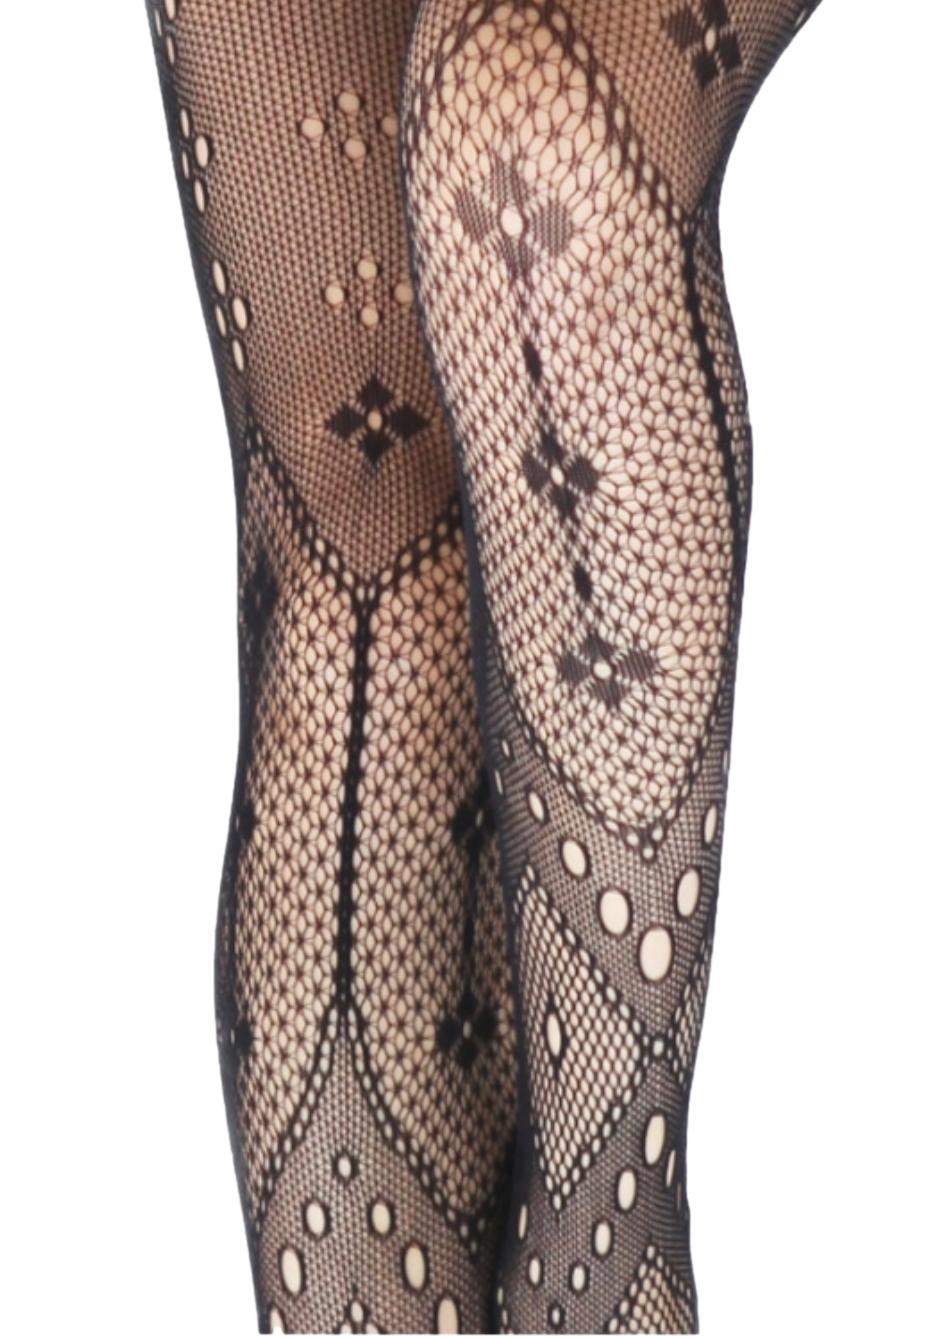 Women's Black Abstract Design Fishnet Tights, Pantyhose